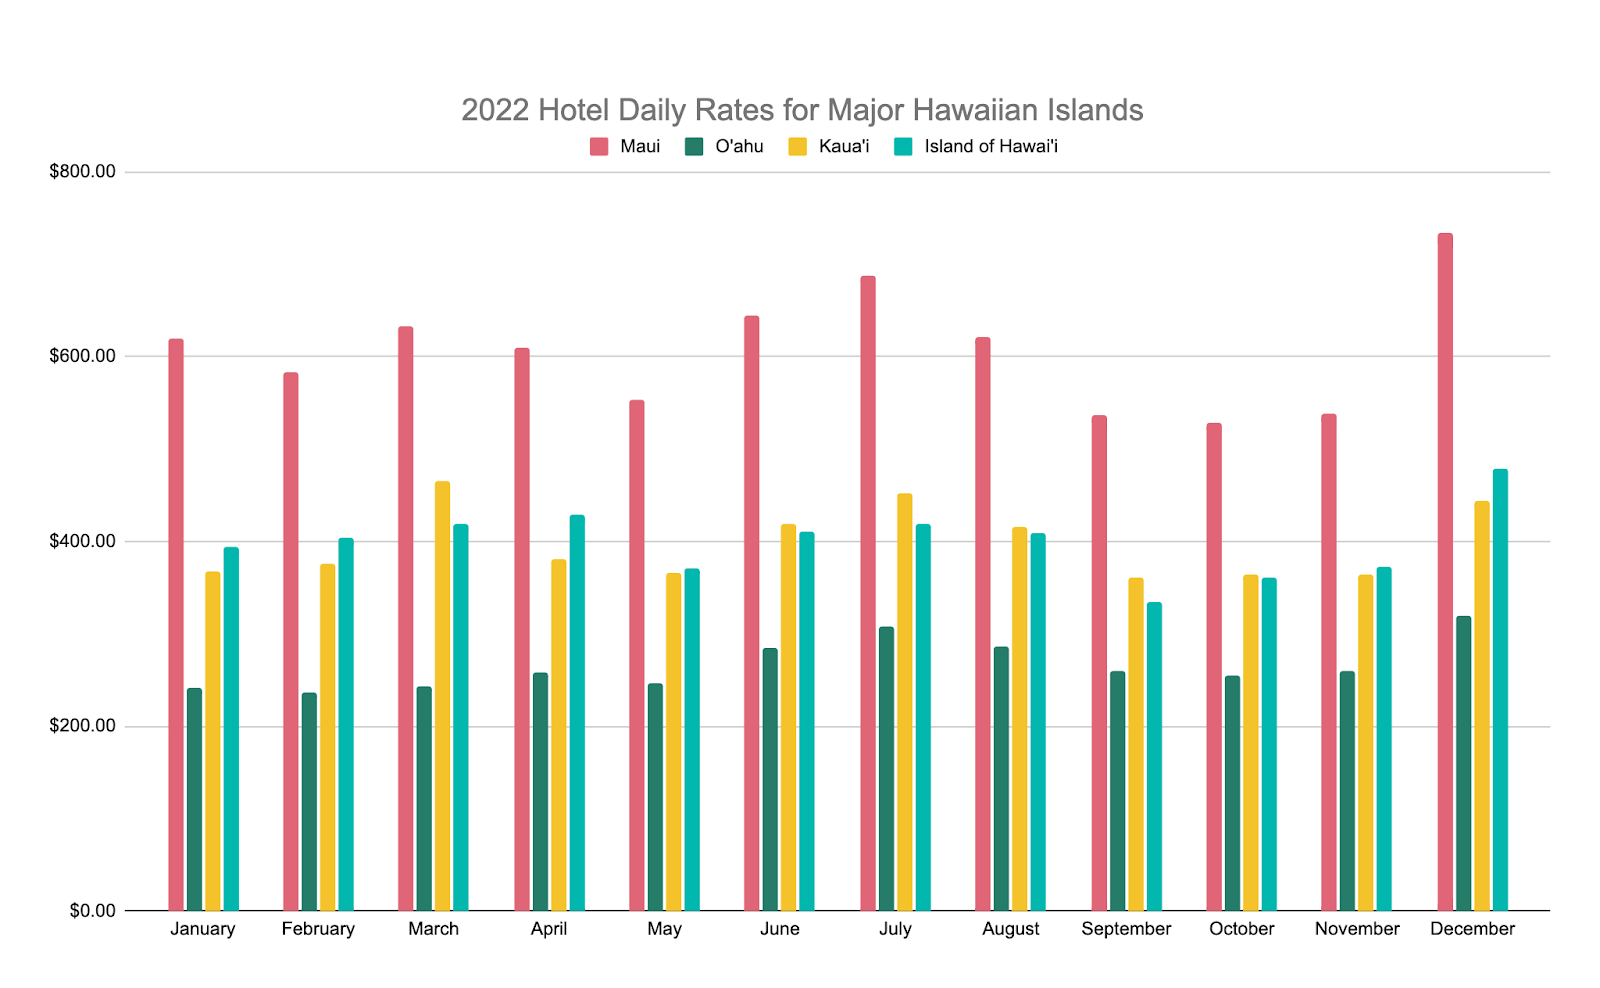 chart showing the daily hotel rates for Hawaii by island